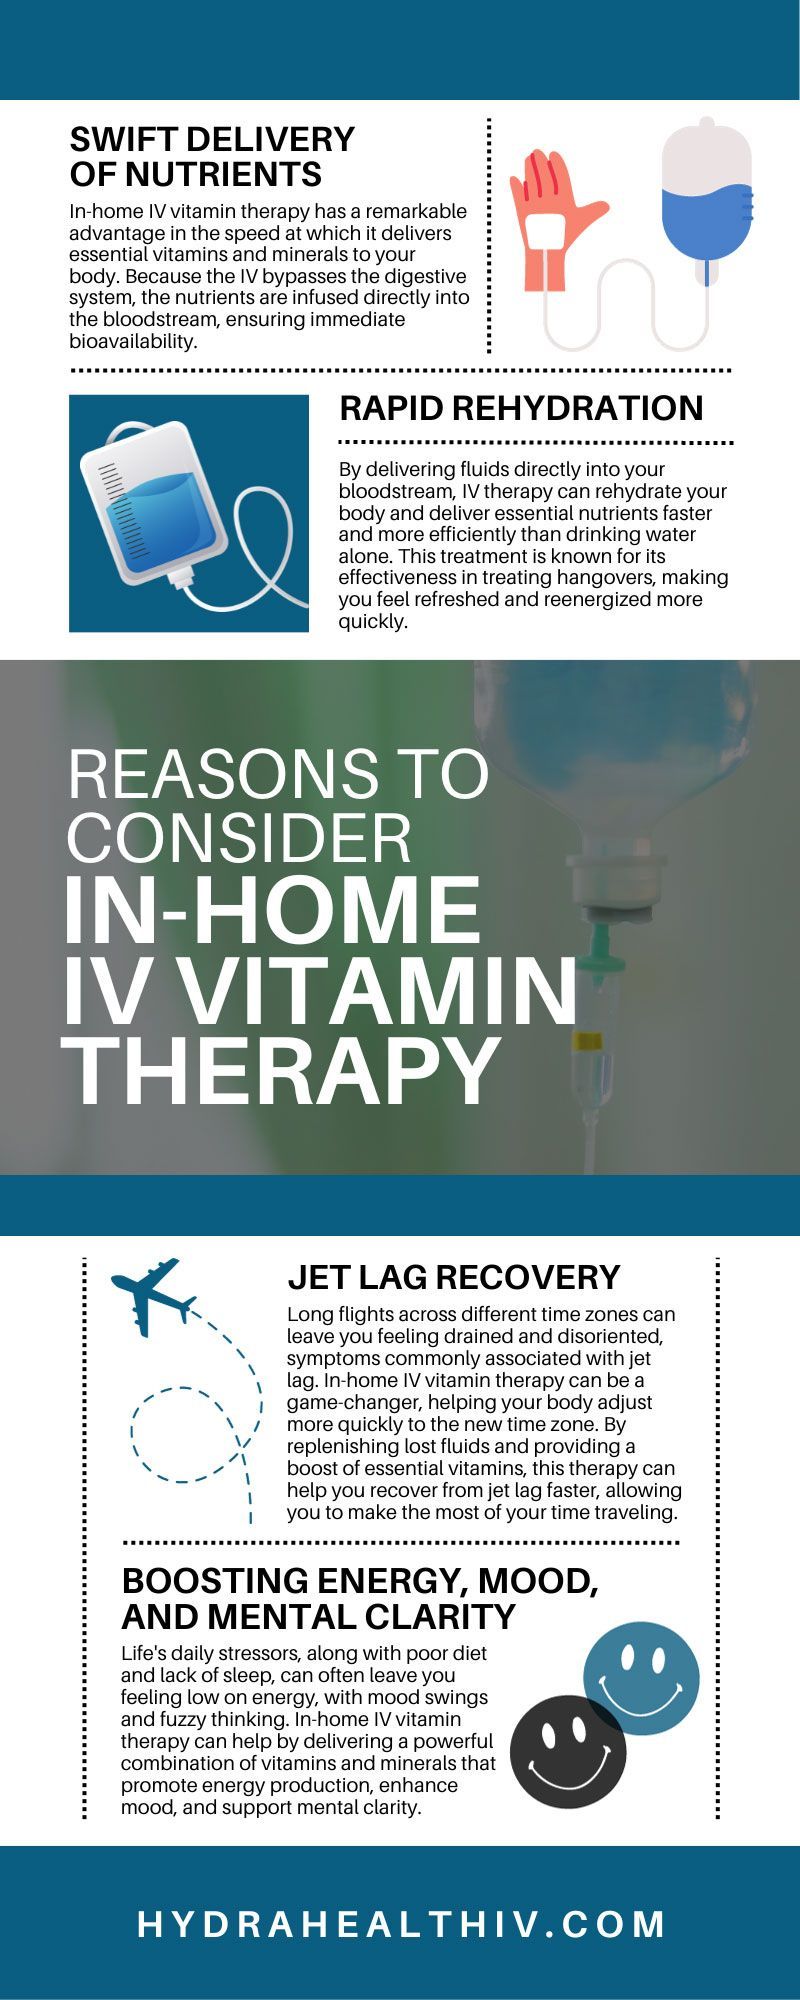 7 Reasons To Consider In-Home IV Vitamin Therapy